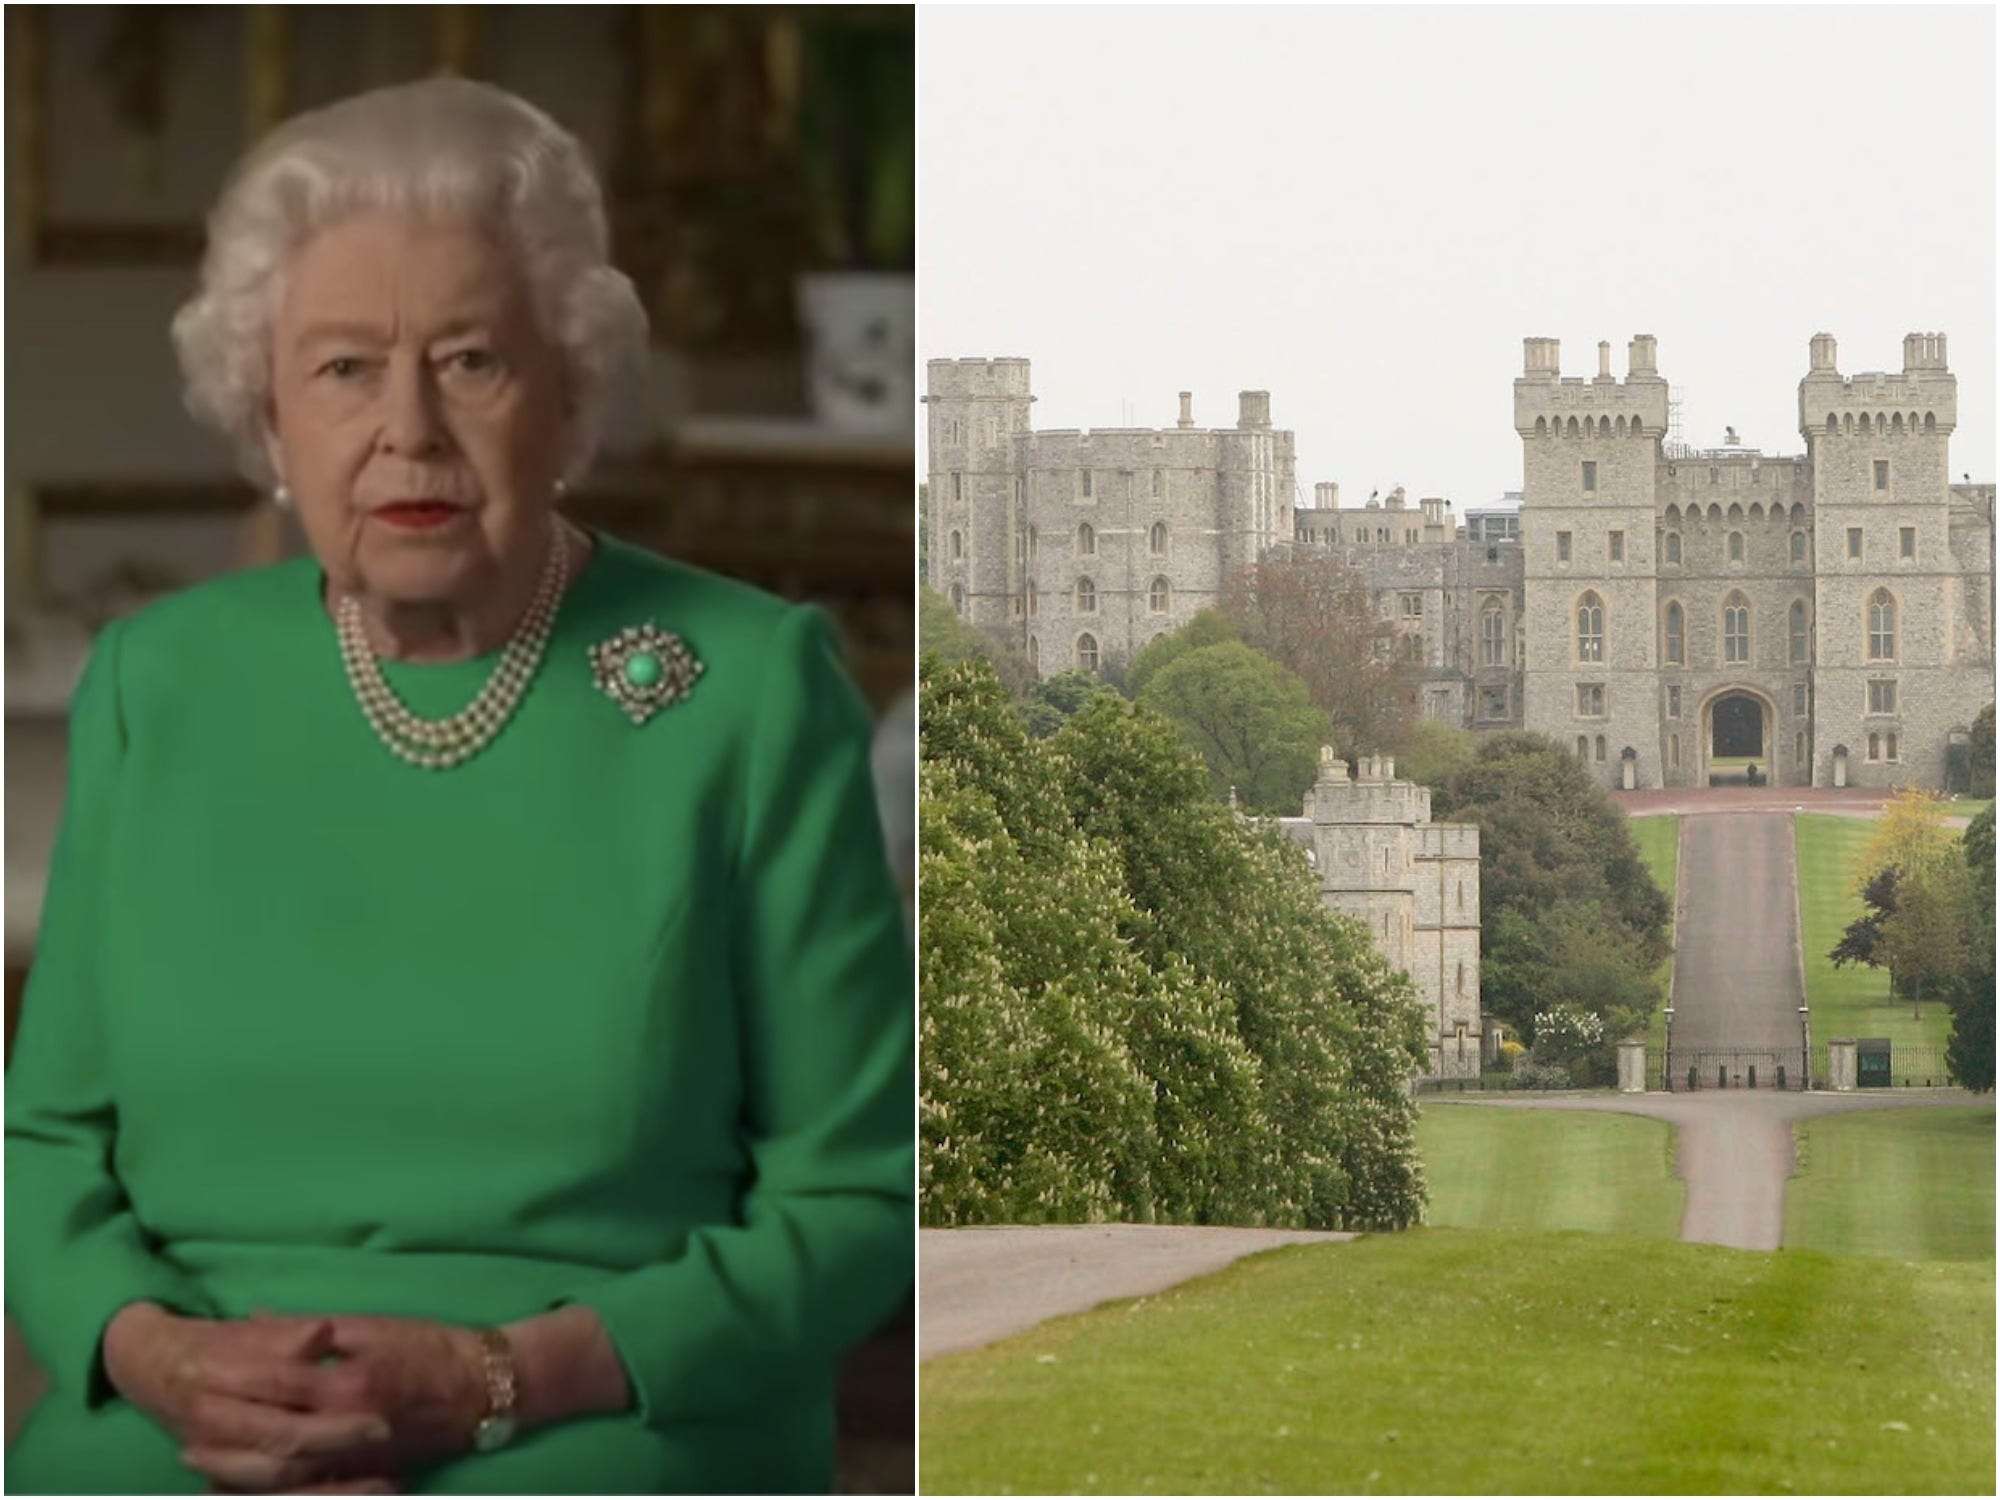 You Can Take A Free Virtual Tour Of Windsor Castle The Largest Occupied Castle In The World Where The Queen Is Spending Her 94th Birthday 